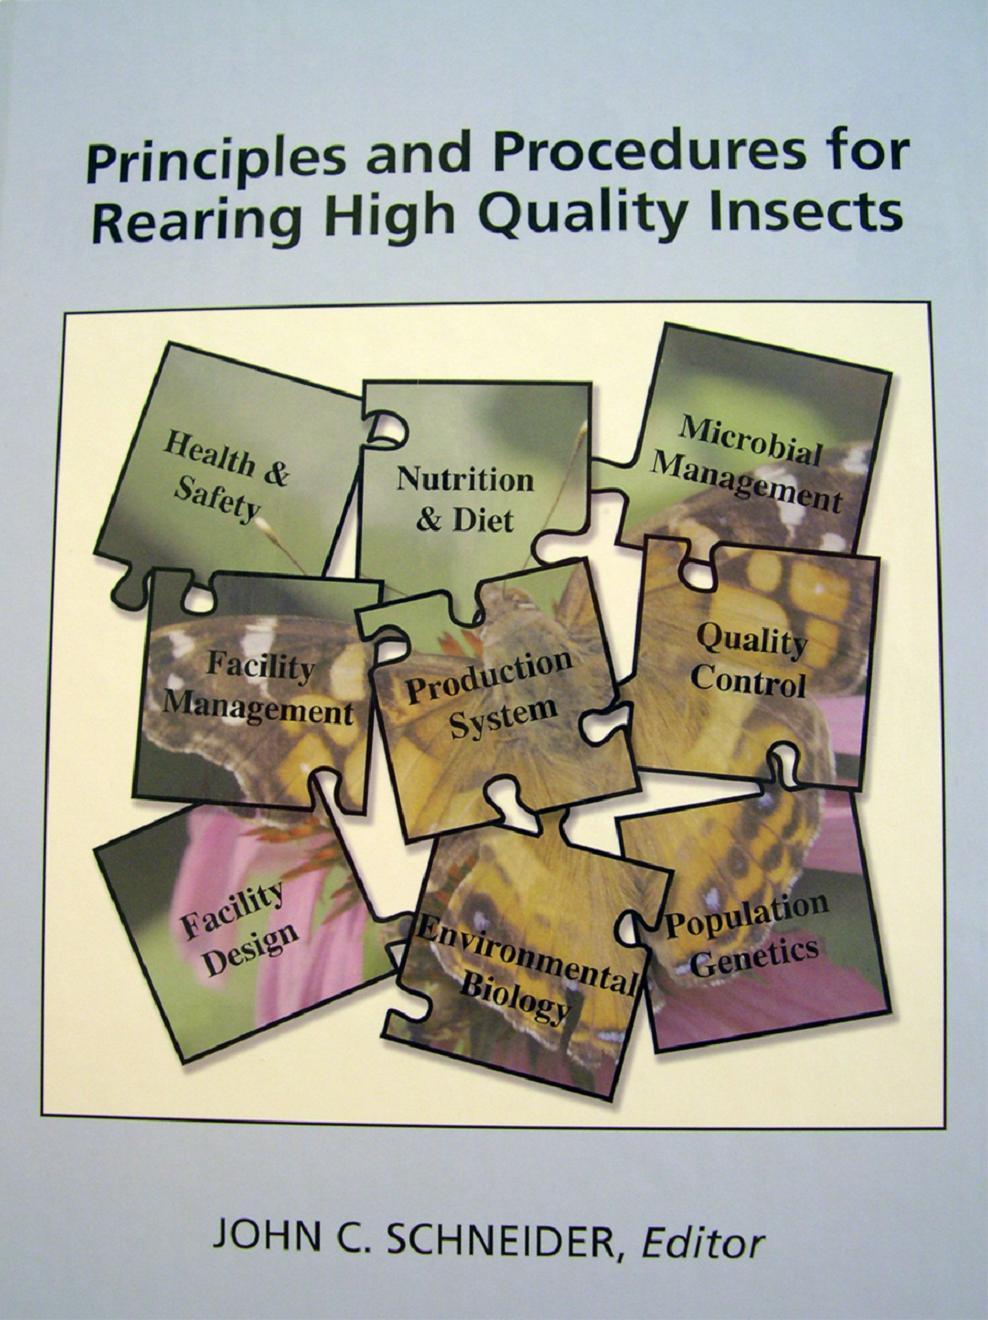 For Additional Information on Detecting and Preventing Insect Diseases Caused by Microbes We recommend our book Principles and Procedures for